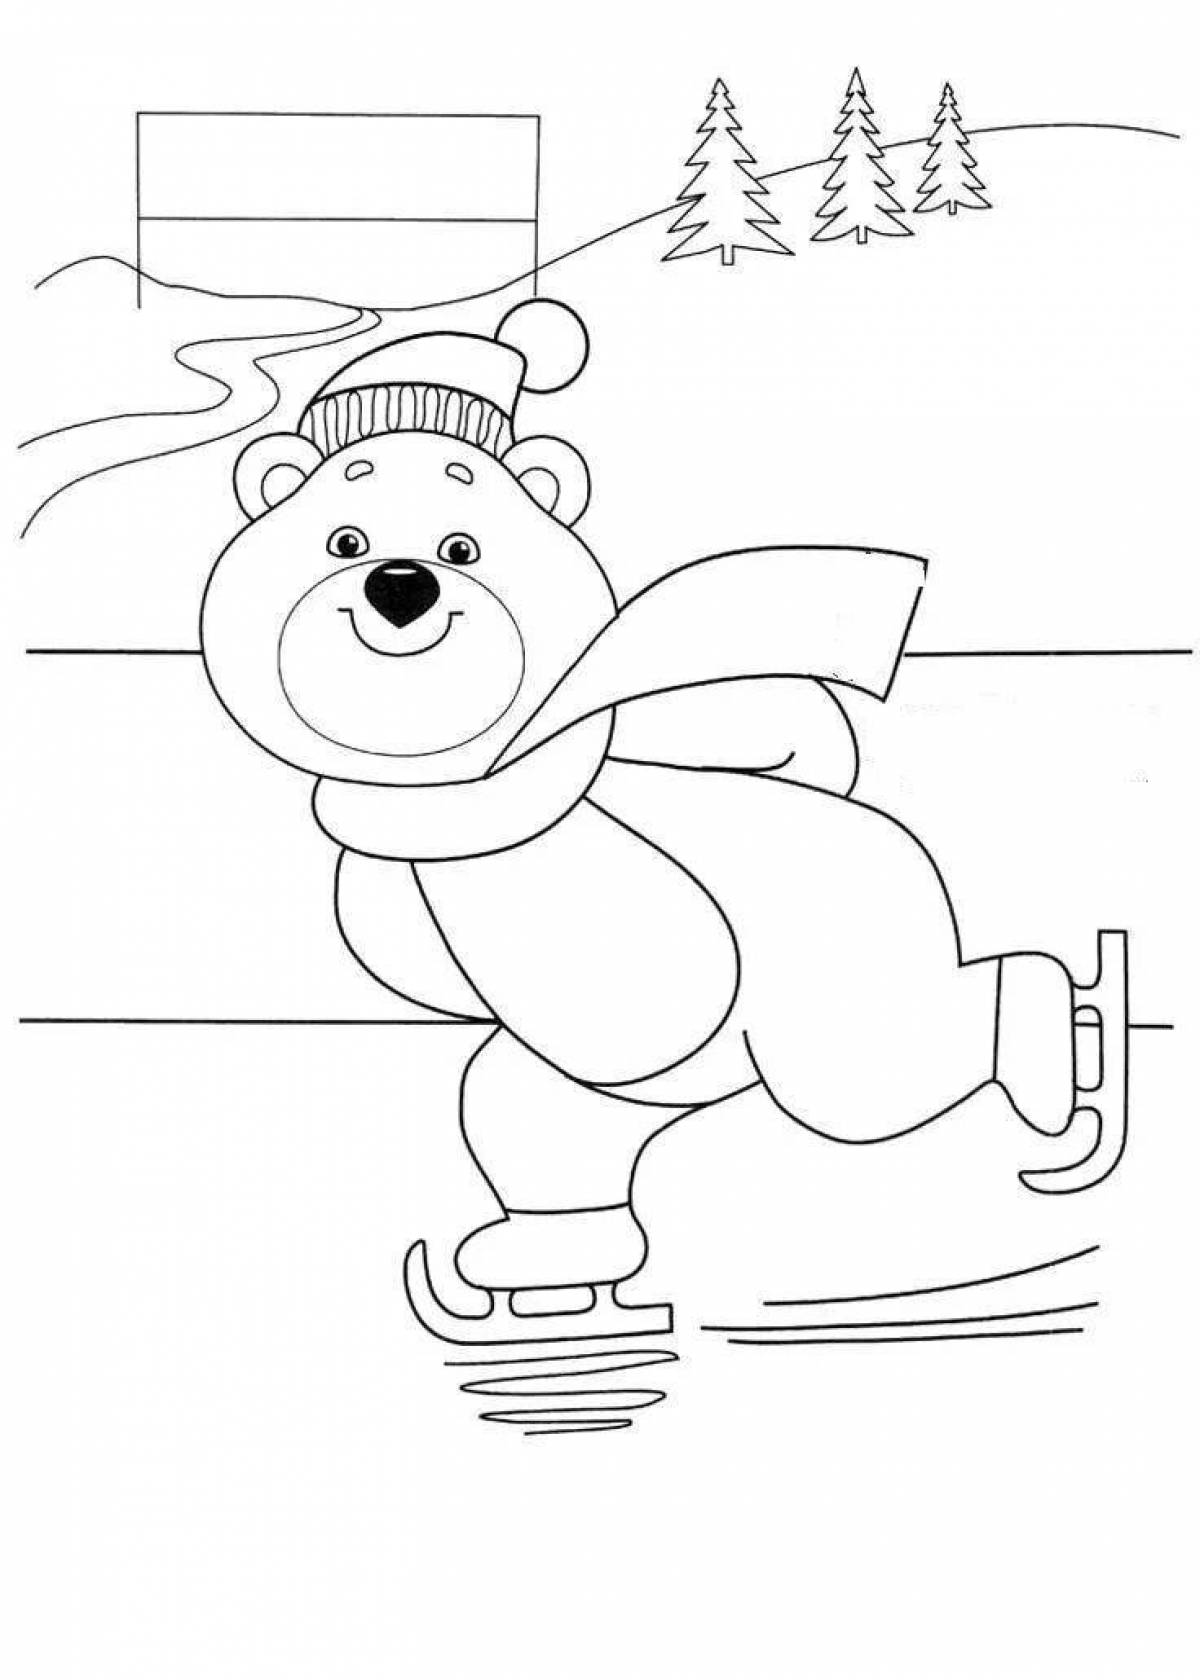 Glamorous olympic bear coloring page